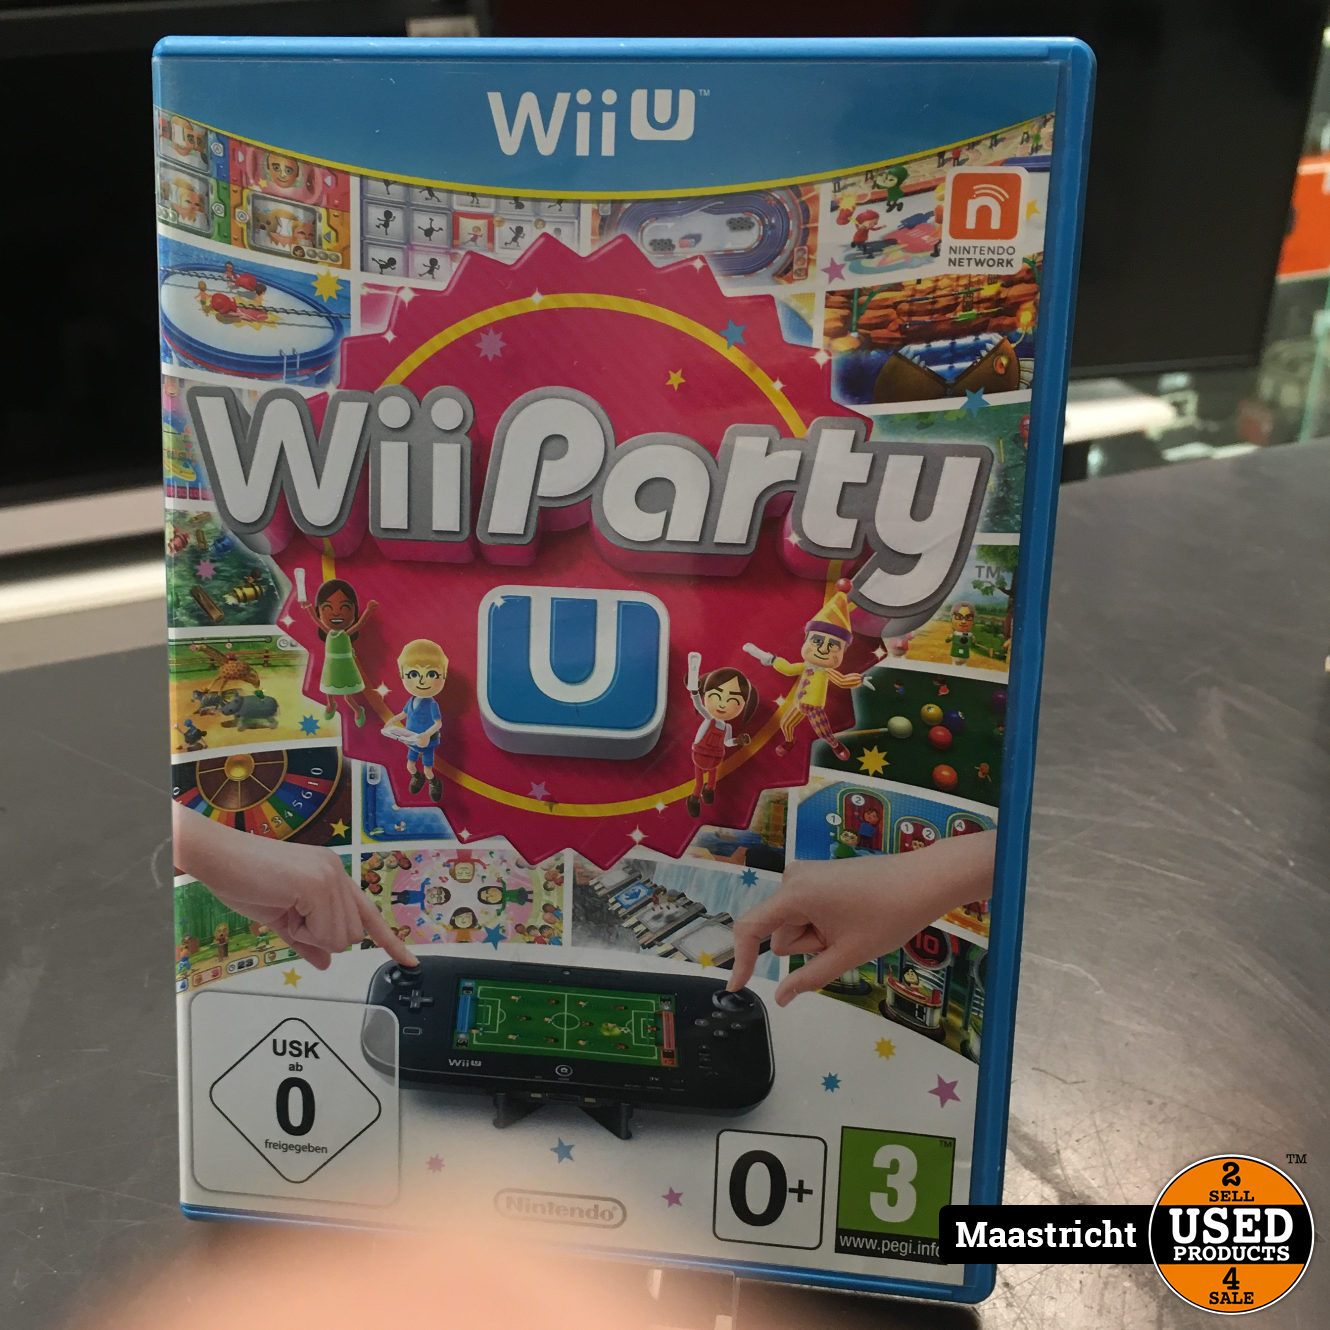 Wii Party | U game | gezien voor 40 euro - Used Products Maastricht